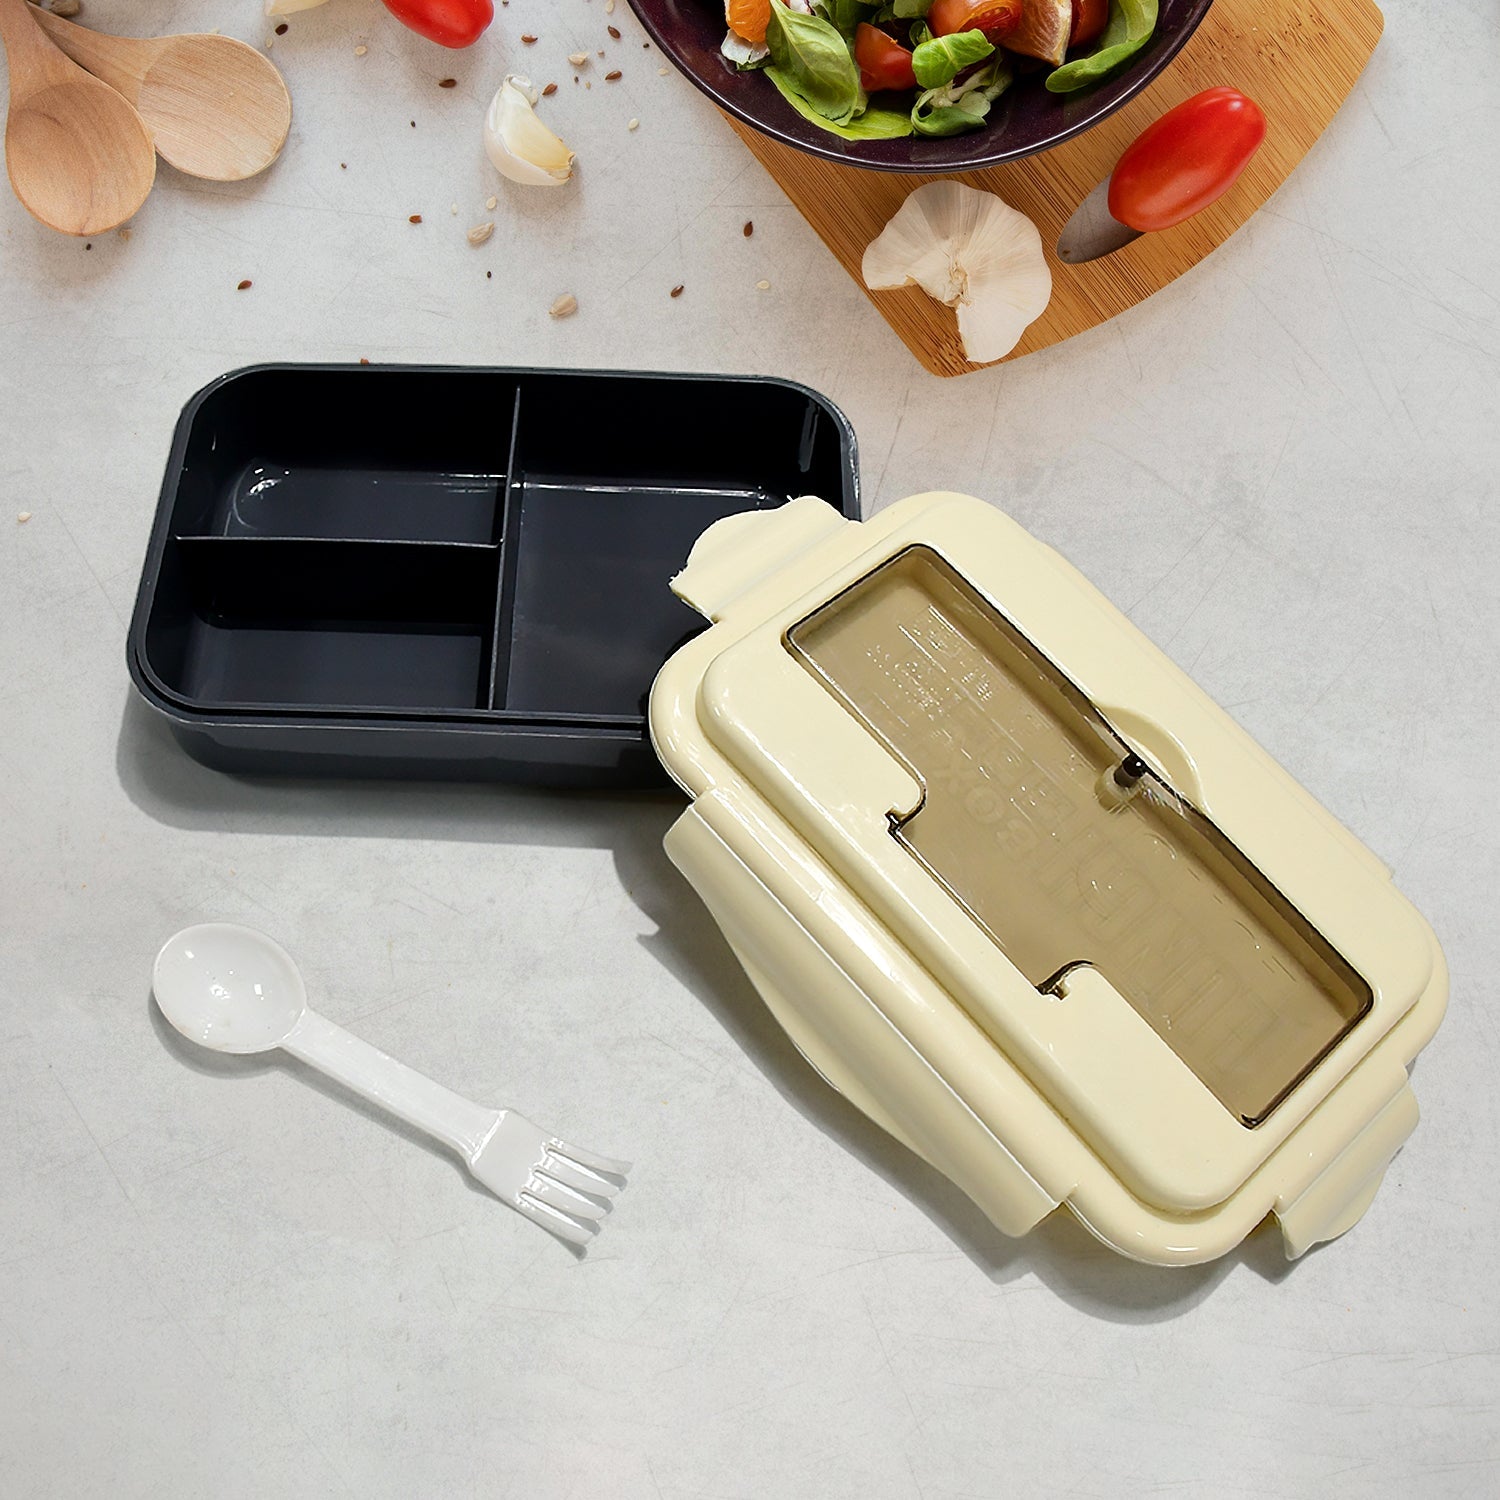 2809 Lunch Box Flex Lock Plastic Liner Lunch Container, Portable Tableware Set for Kid Adult Student Children Keep Food Warm